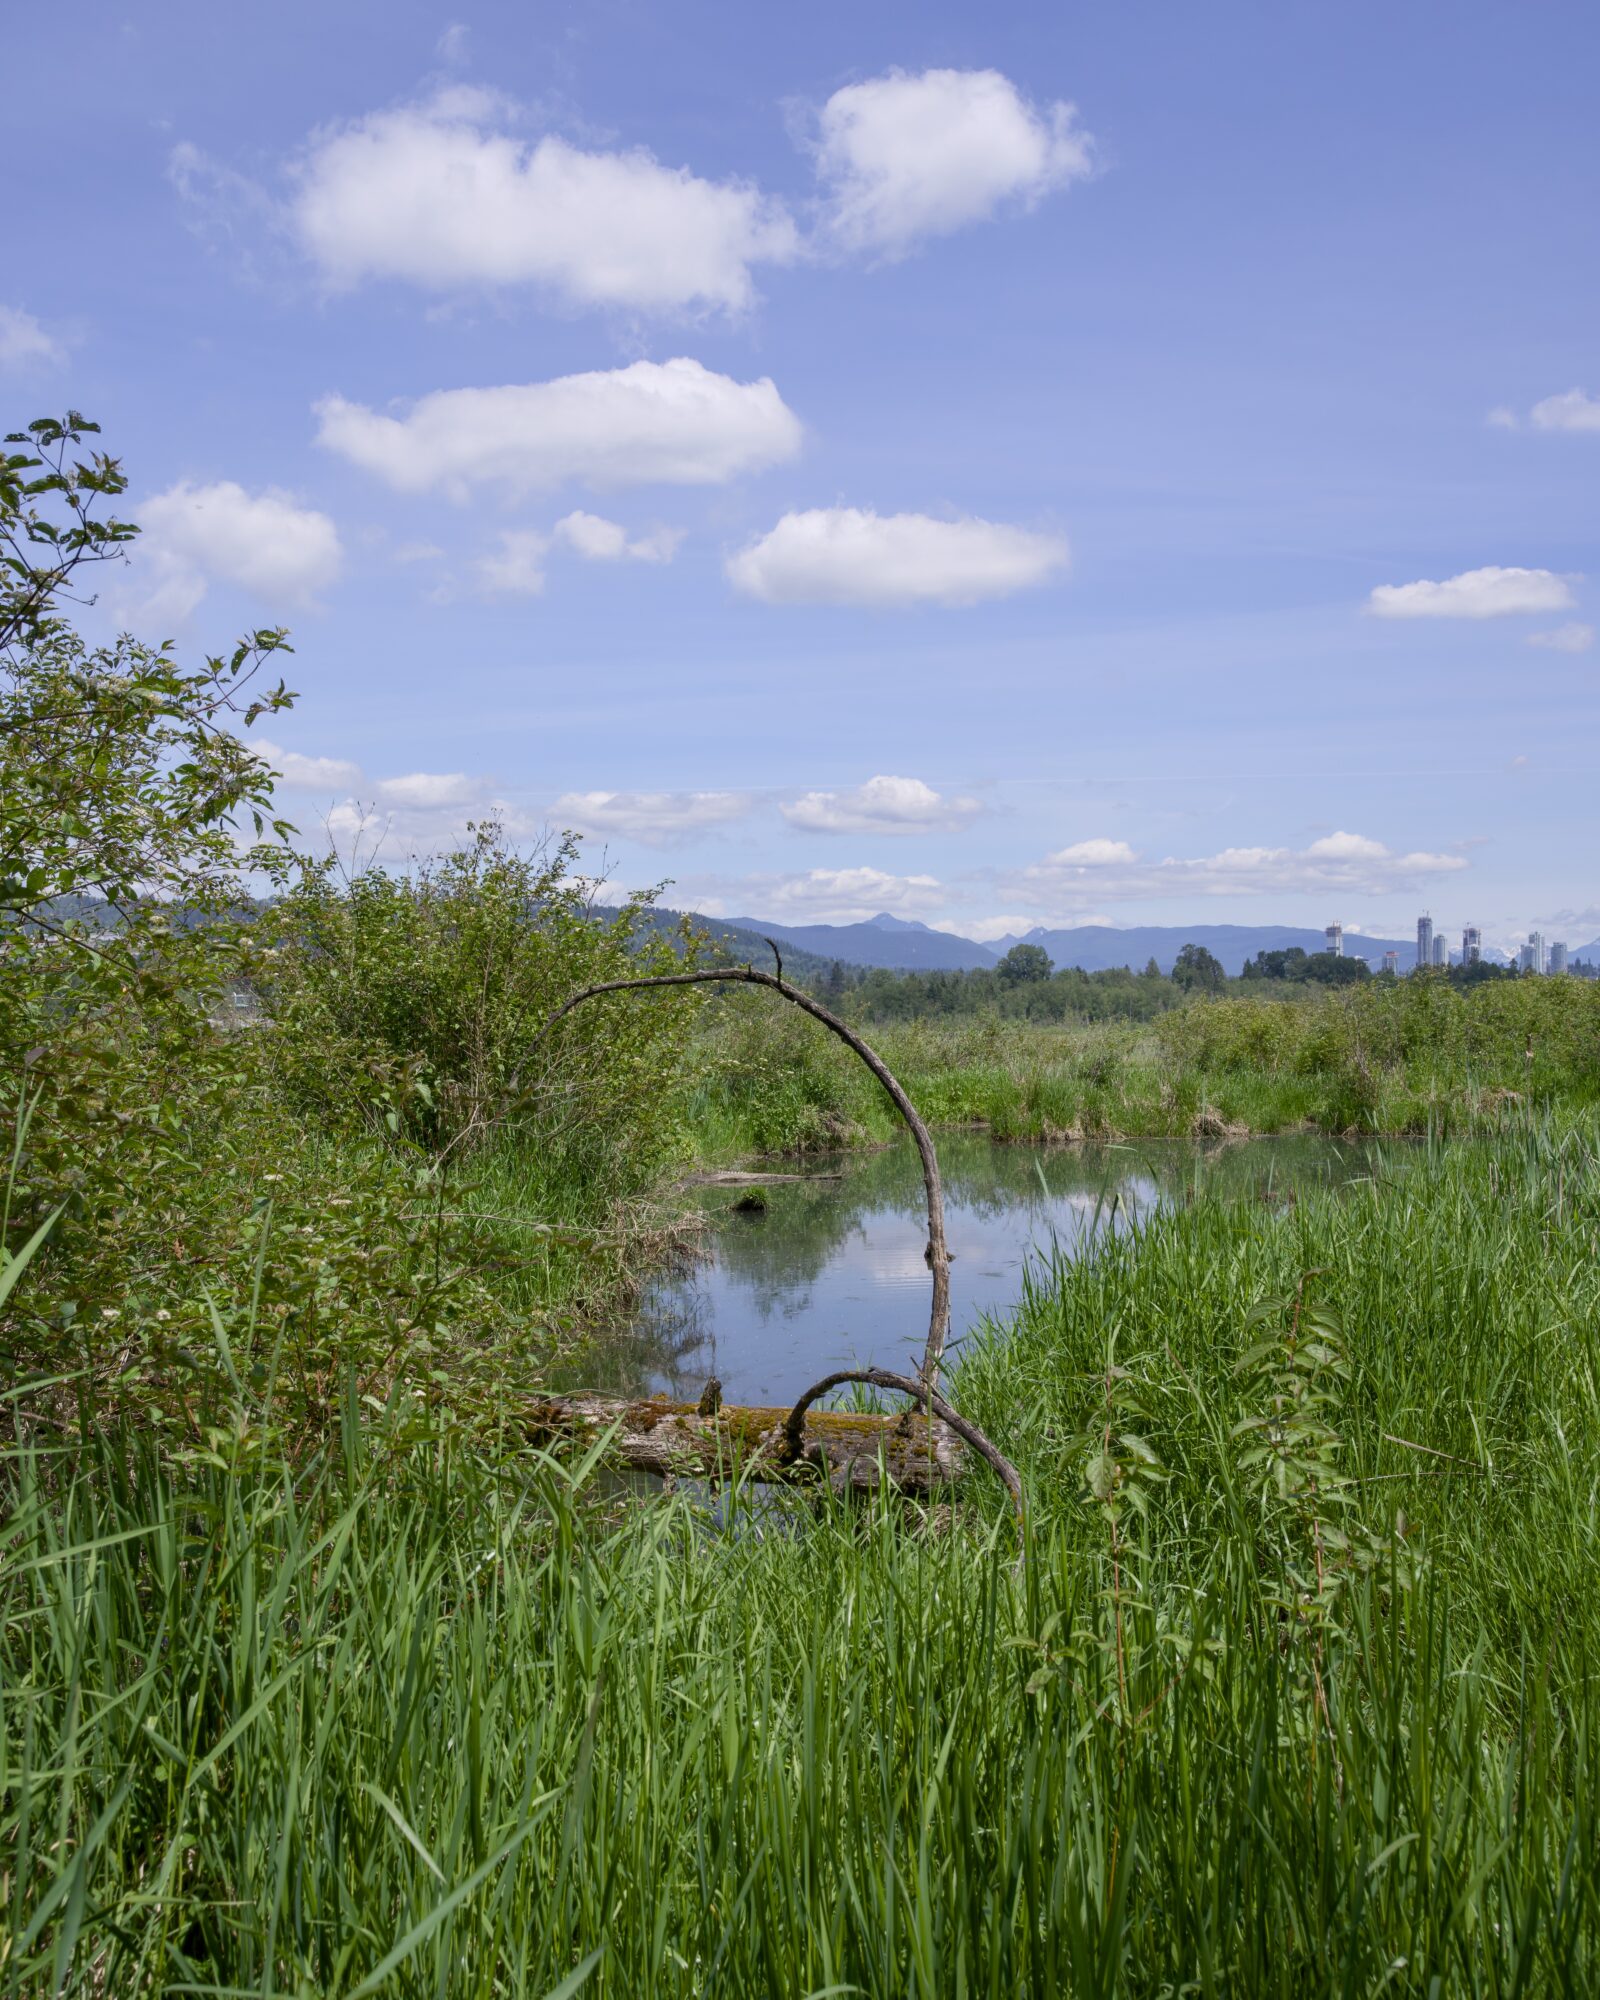 A little pond surrounded by green reeds, under a blue lightly clouded sky. Just in front of the pond is a small tree that seems to bend back towards the ground, like a portal. On the horizon on the right, some faraway towers